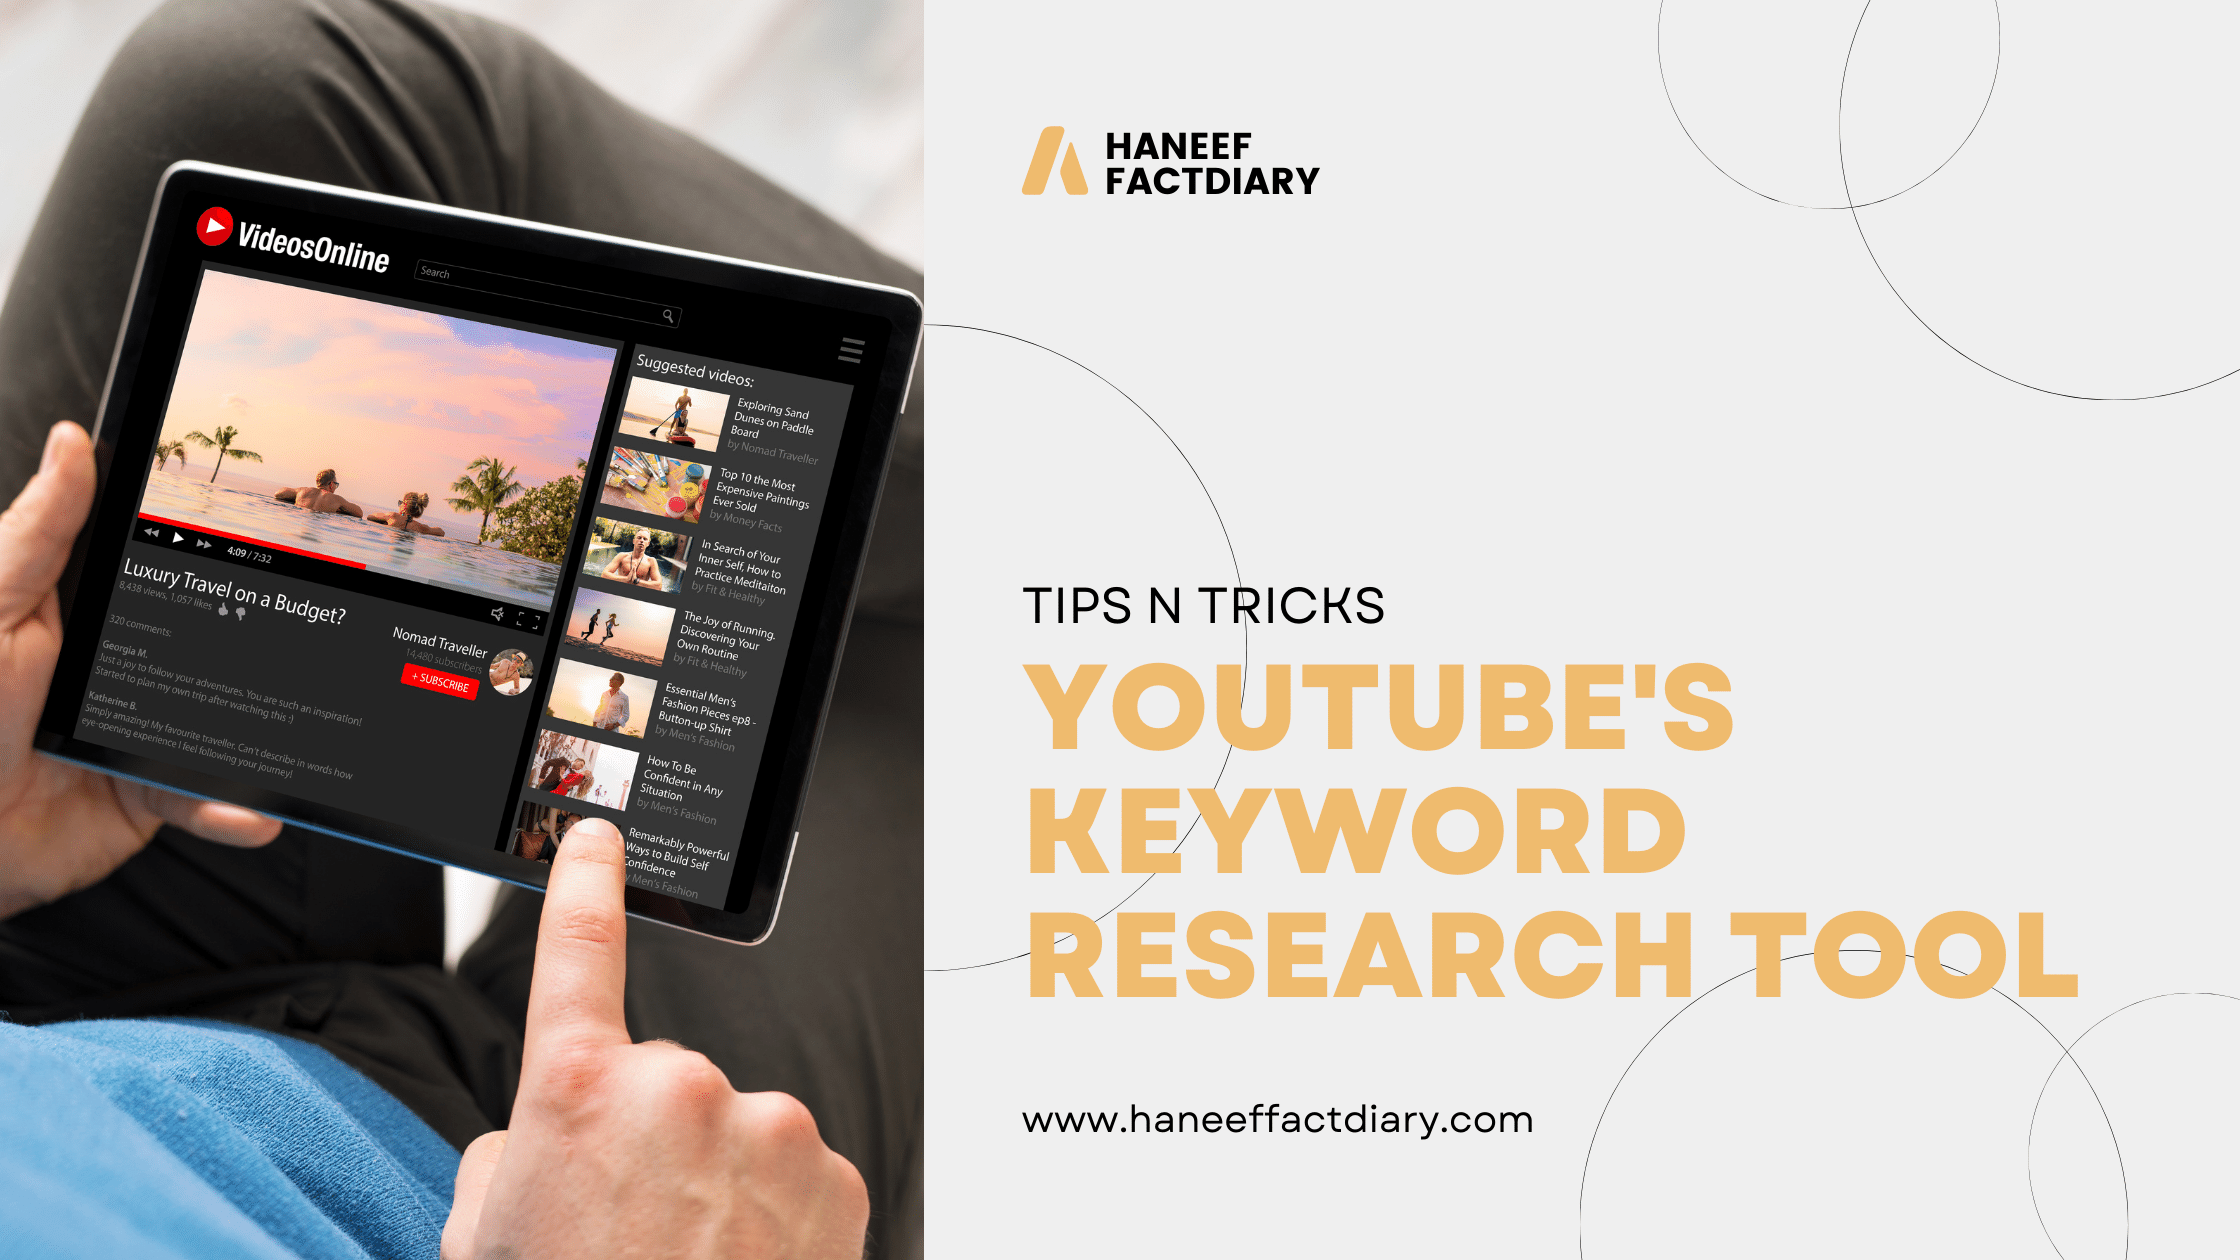 YouTube's Keyword Research Tool